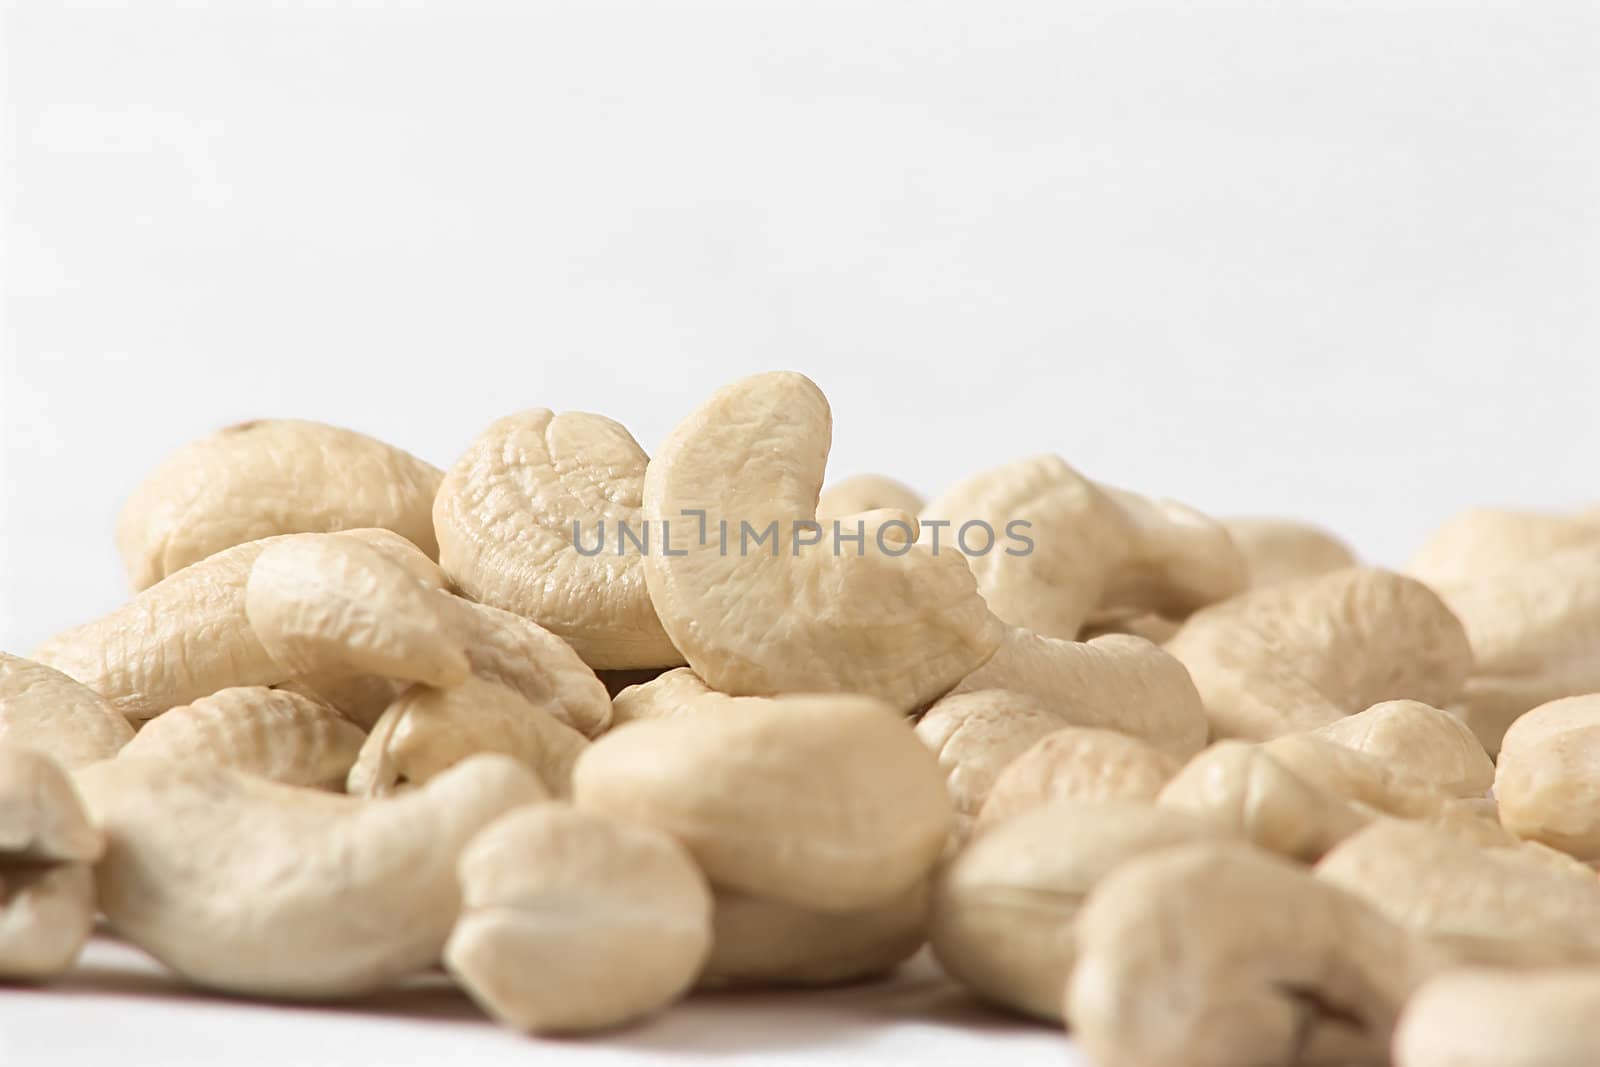 A Pile of raw cashew nuts, A healthy food source